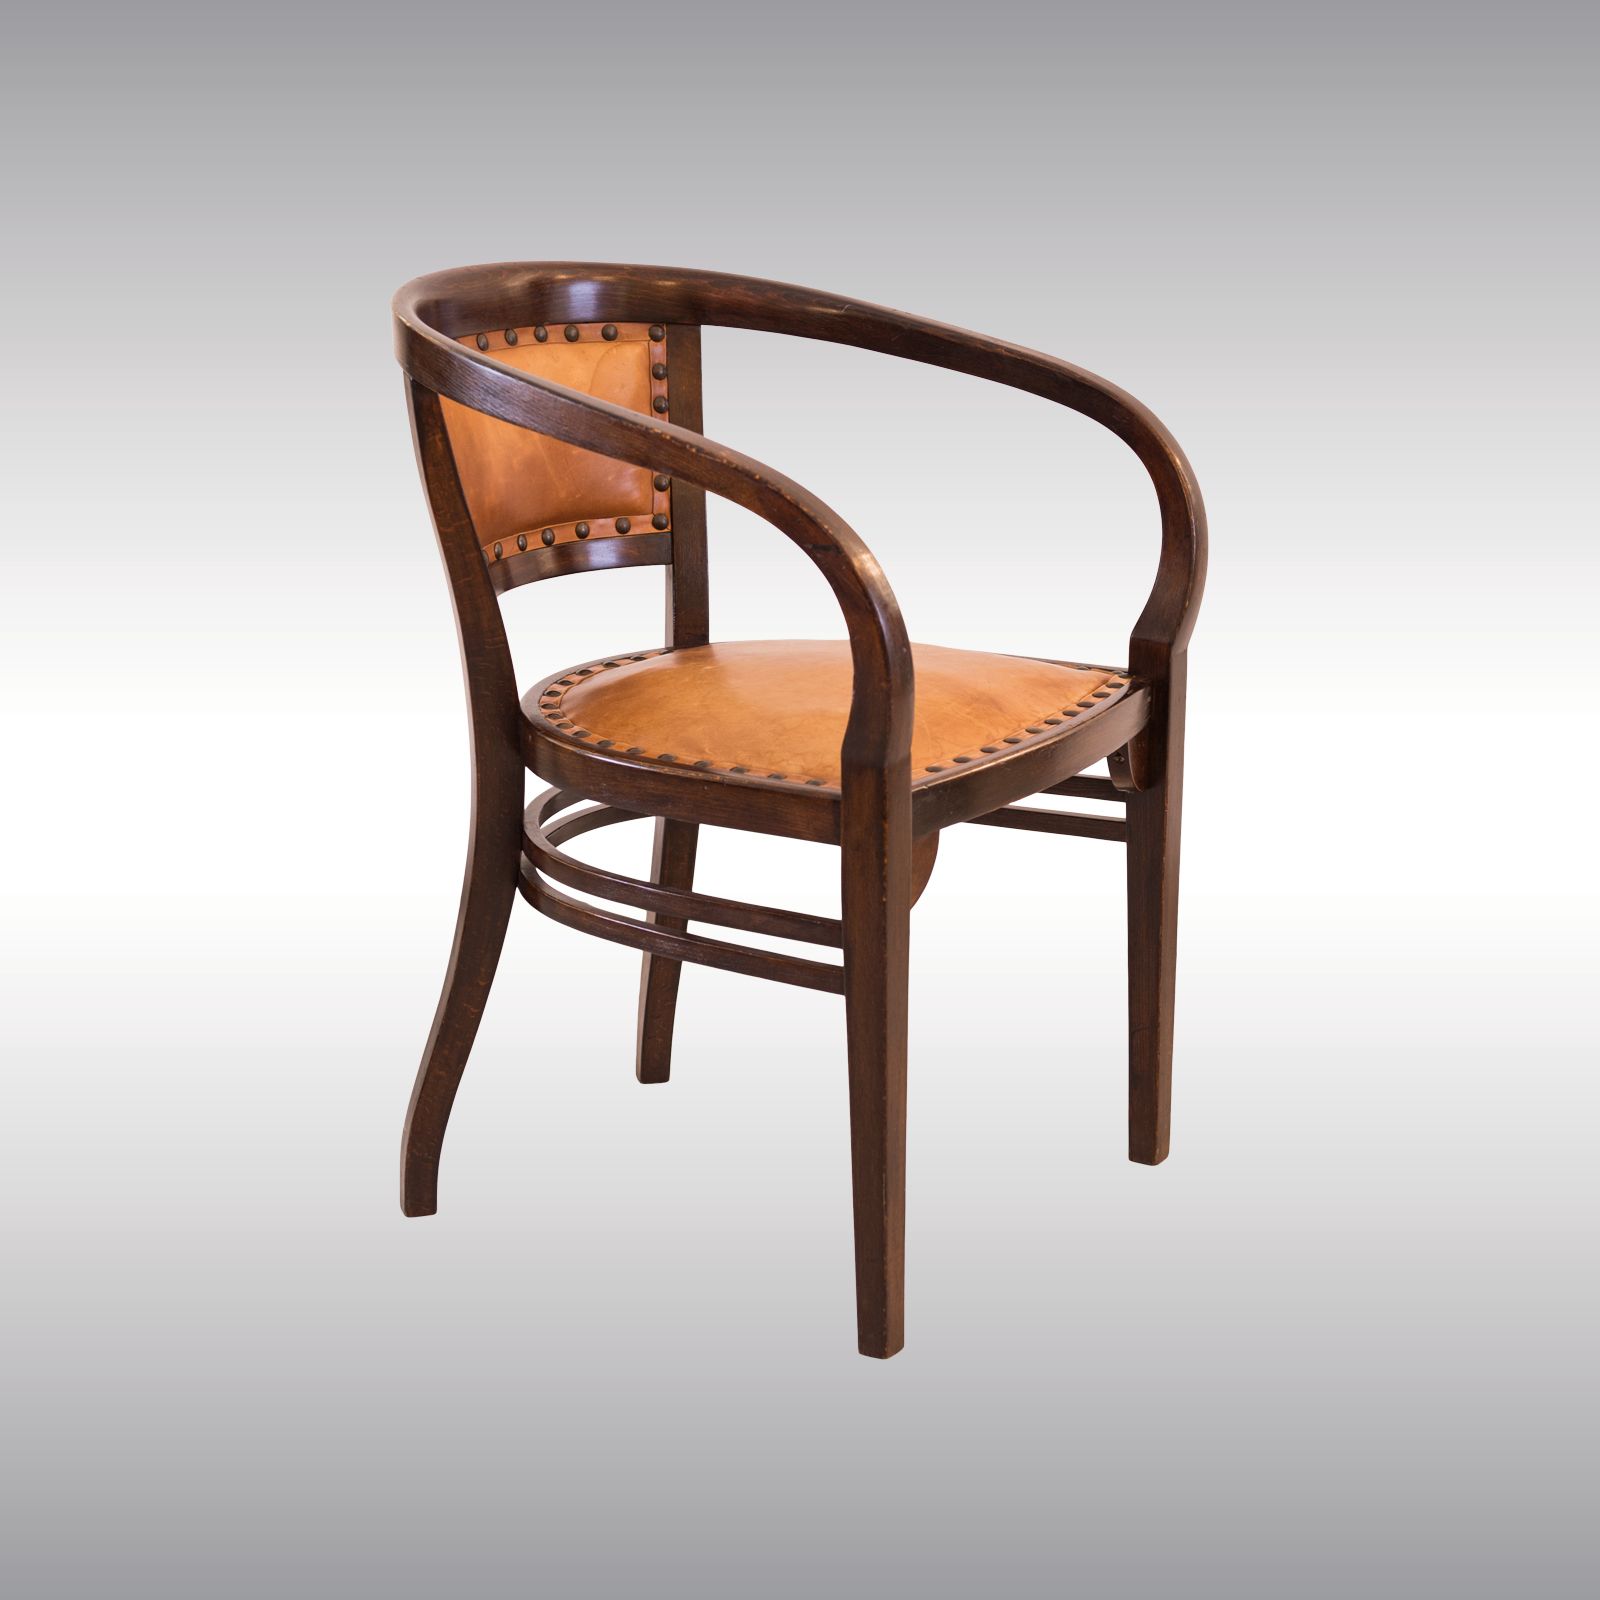 WOKA LAMPS VIENNA - OrderNr.: 80031|Extremely rare and beautiful Otto Wagner Chair by Thonet 1901 - Design: Otto Wagner